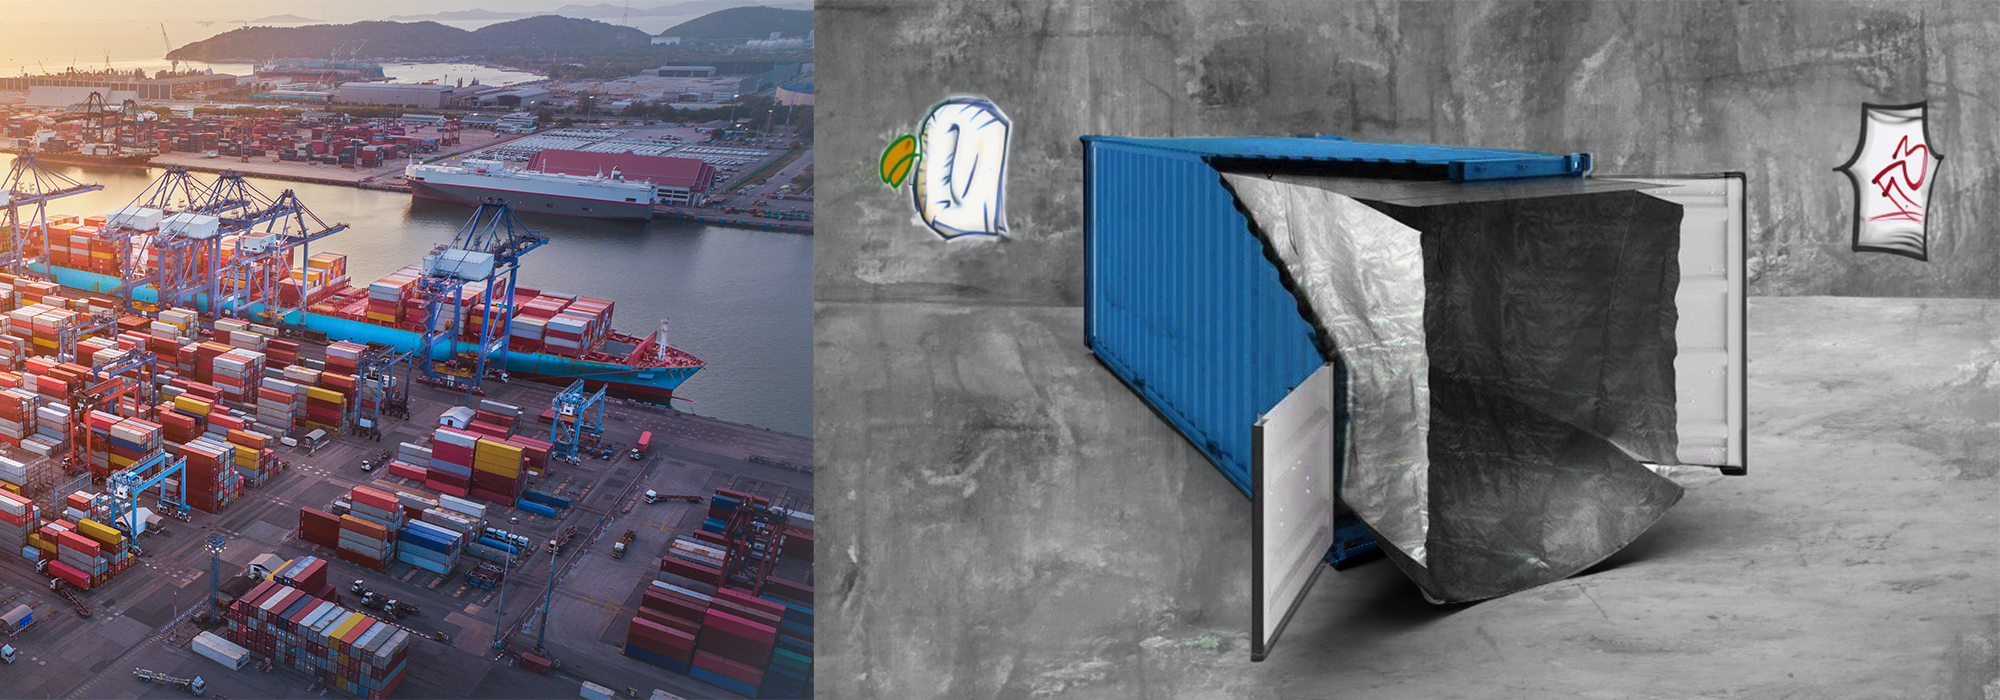 Container liner image montage